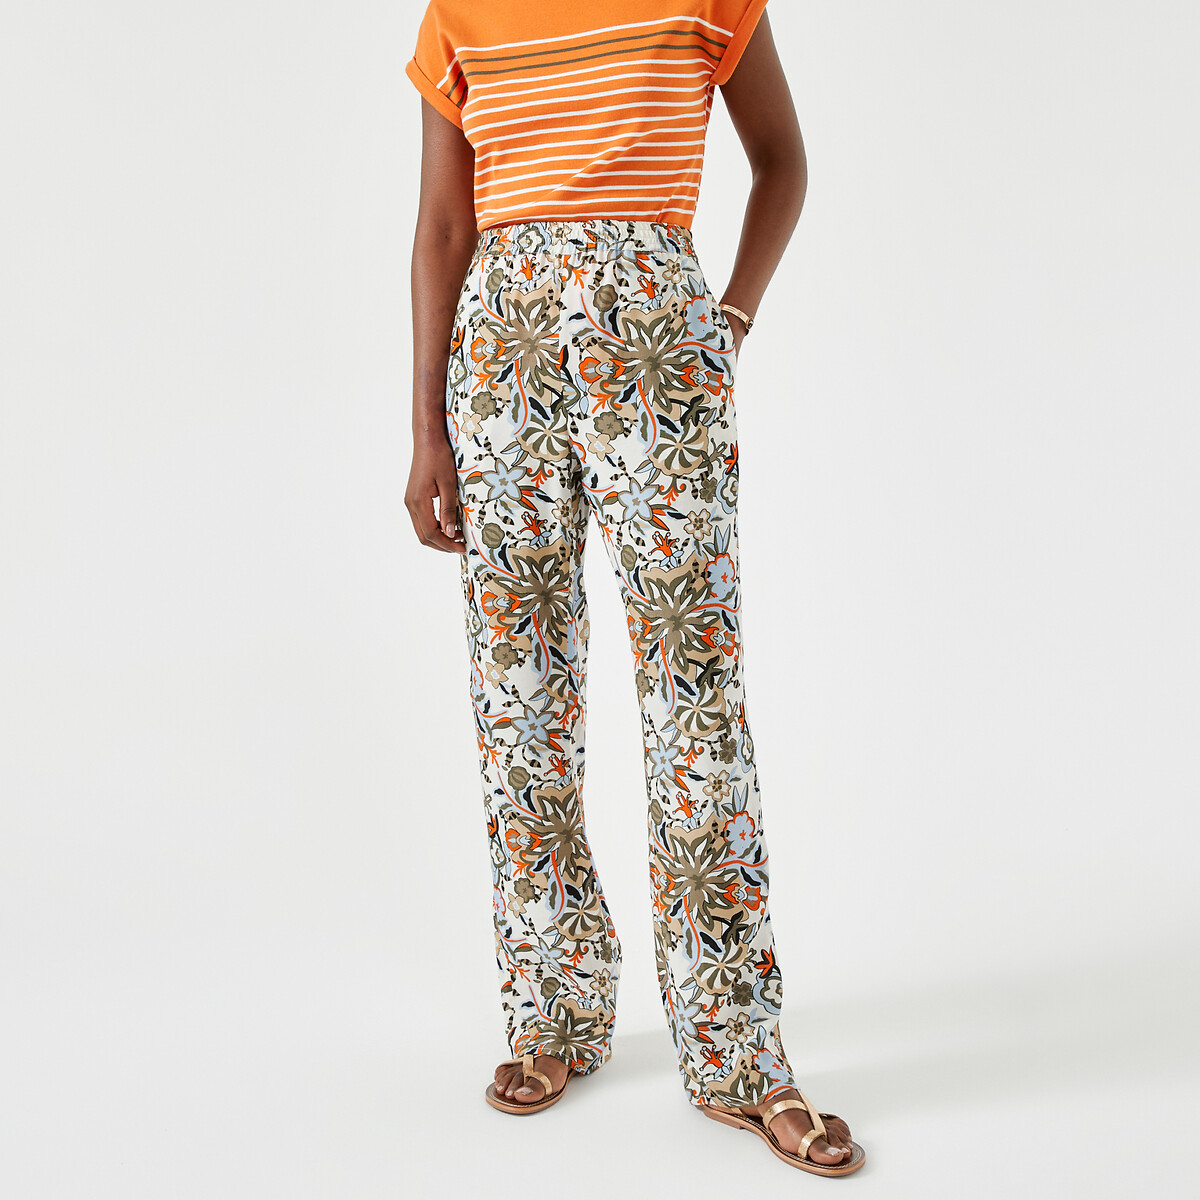 Image of Floral Wide Leg Trousers, Length 30.5"